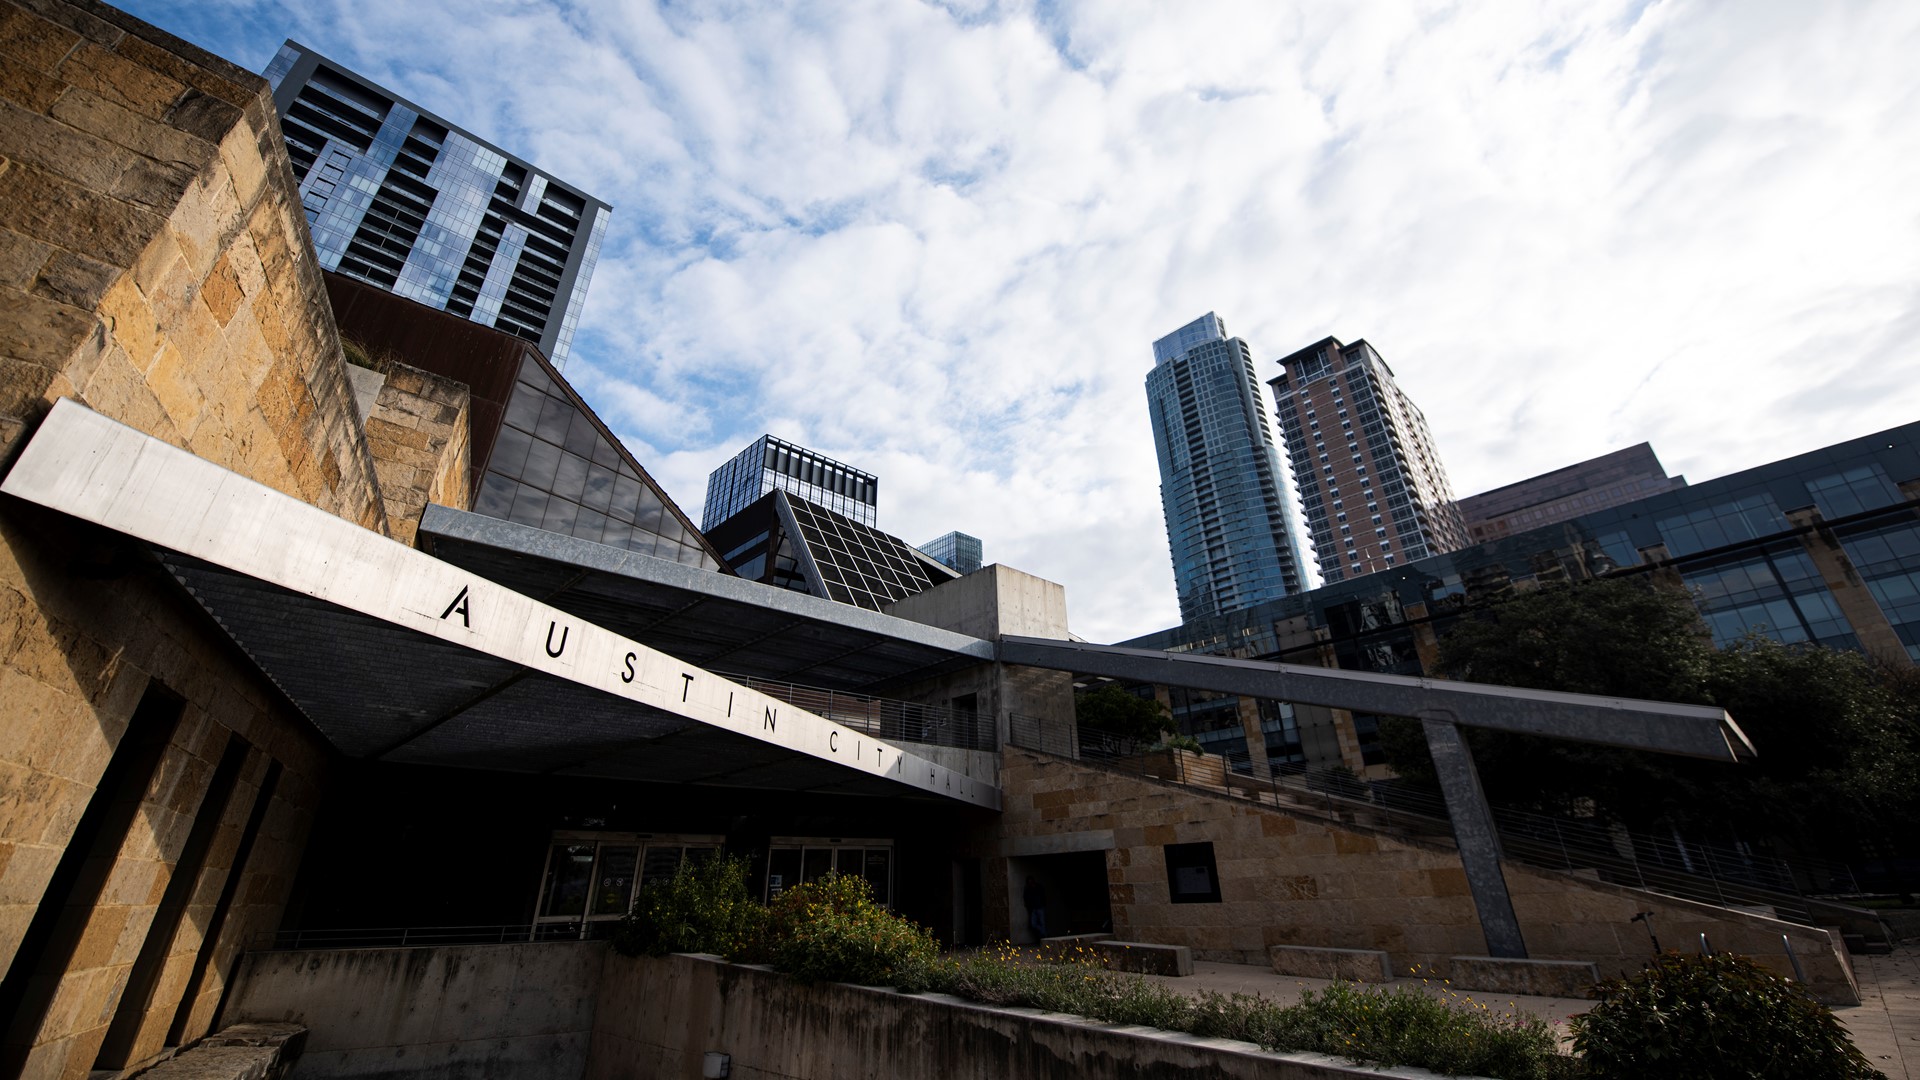 The City of Austin says the proposed budget focuses on filling existing vacancies and "stemming employee attrition."